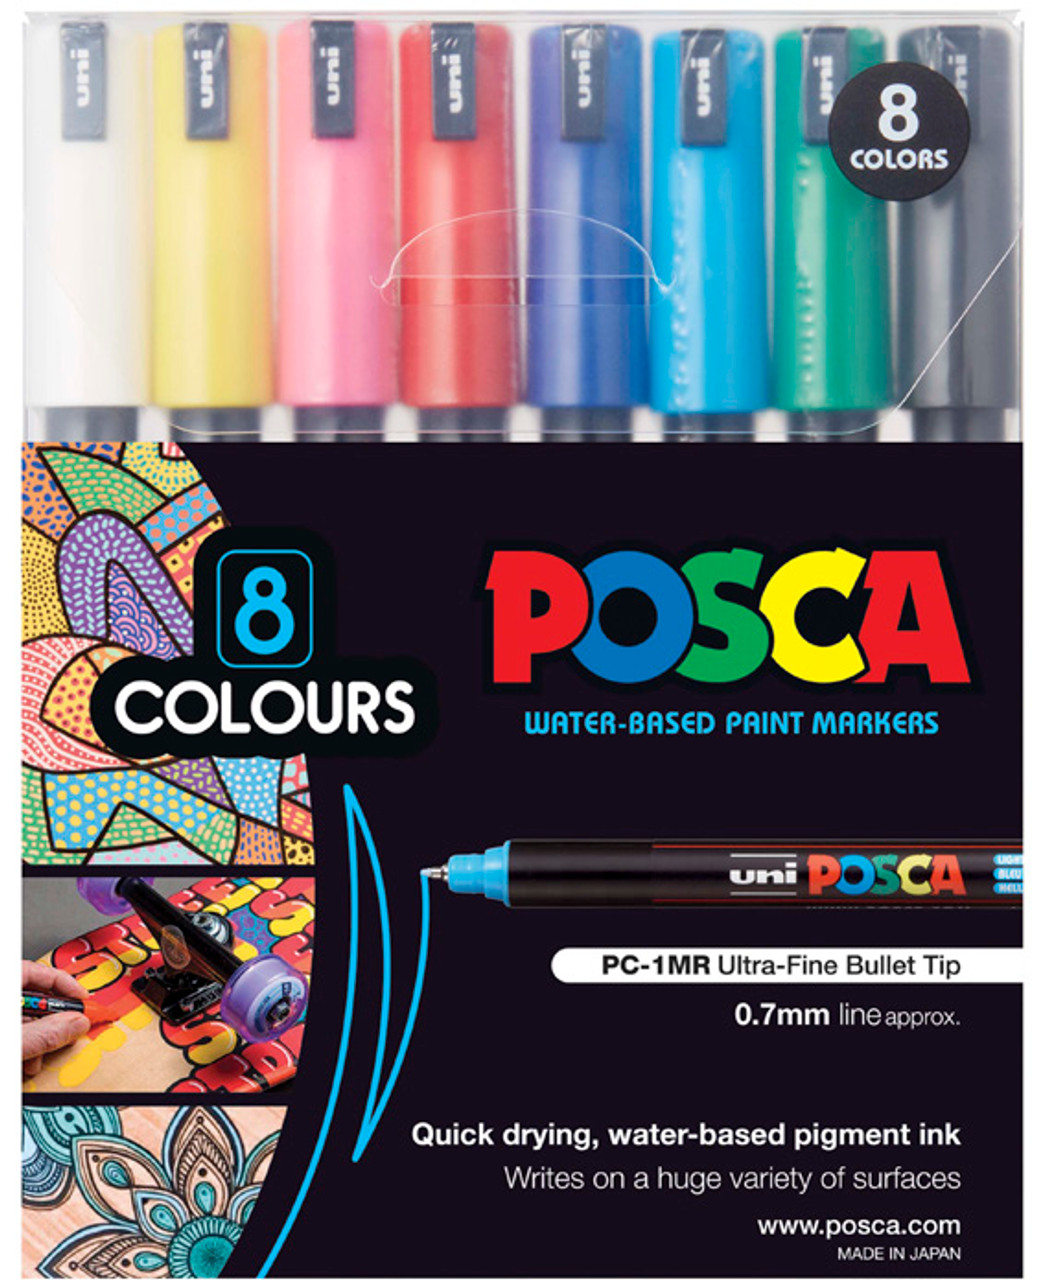 Uniball POSCA PC-1MR Assorted Colours Kit of 8 Paint Marker Pens